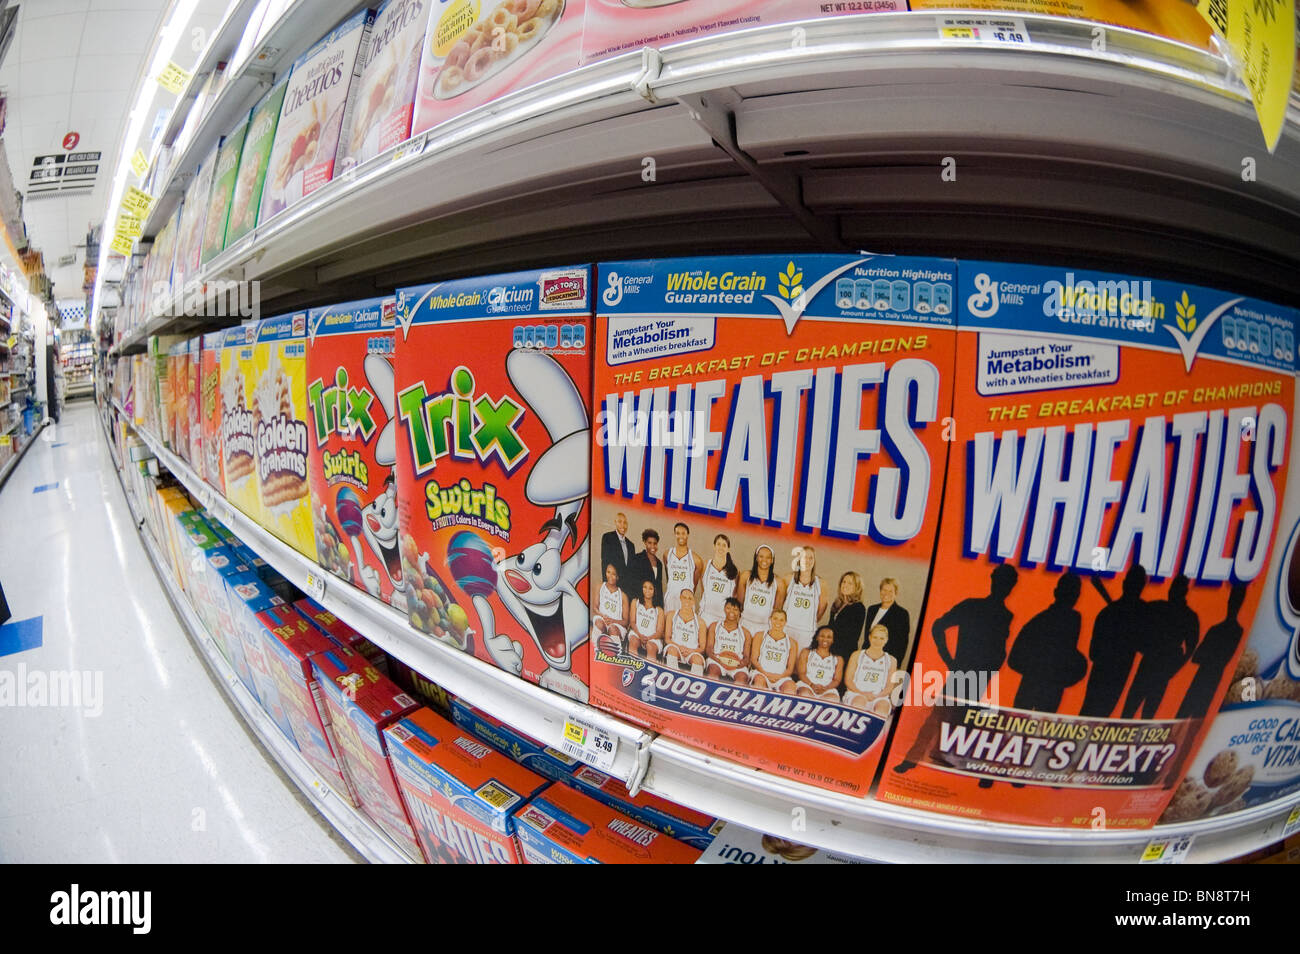 Boxes of General Mills breakfast cereals including Wheaties and Trix displayed on supermarket shelves Stock Photo